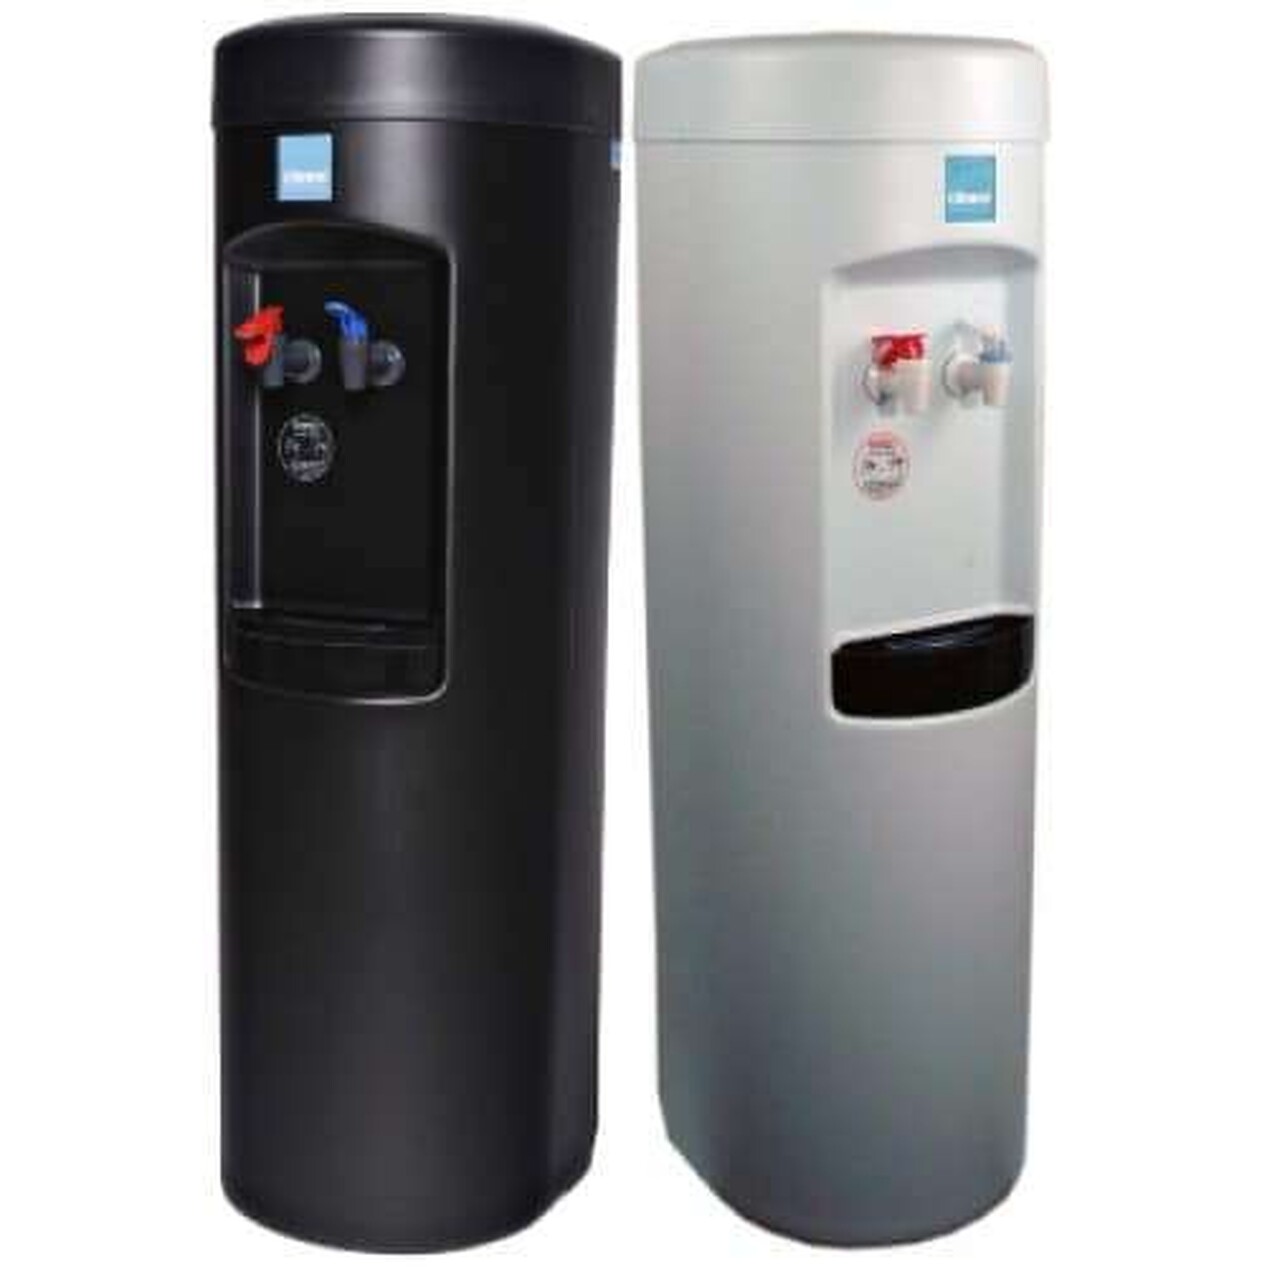 Water Filtration, Softener, & Purificatin